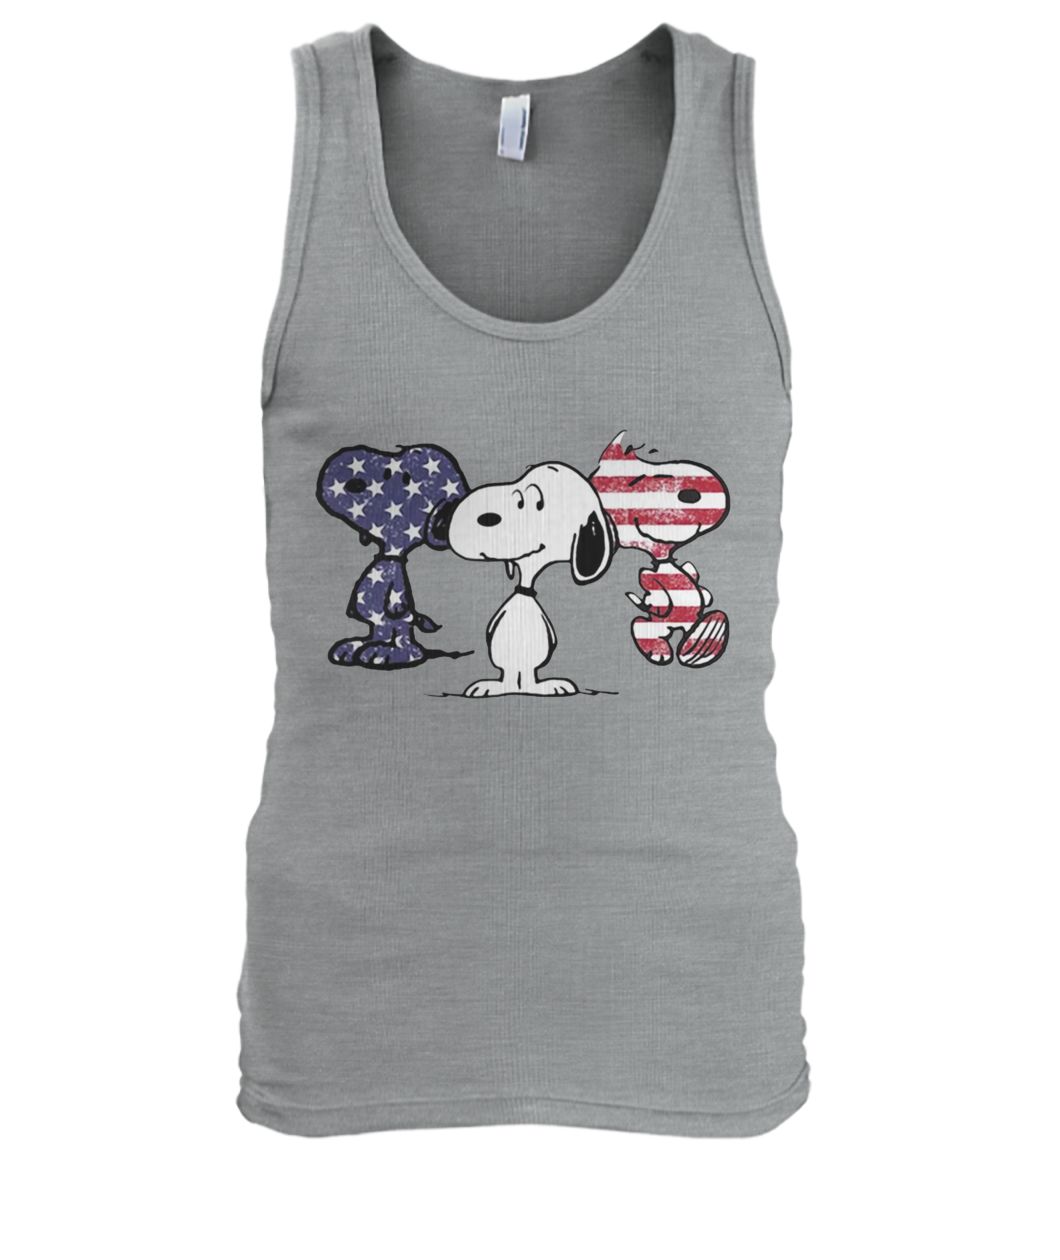 Snoopy america flag 4th of july men's tank top